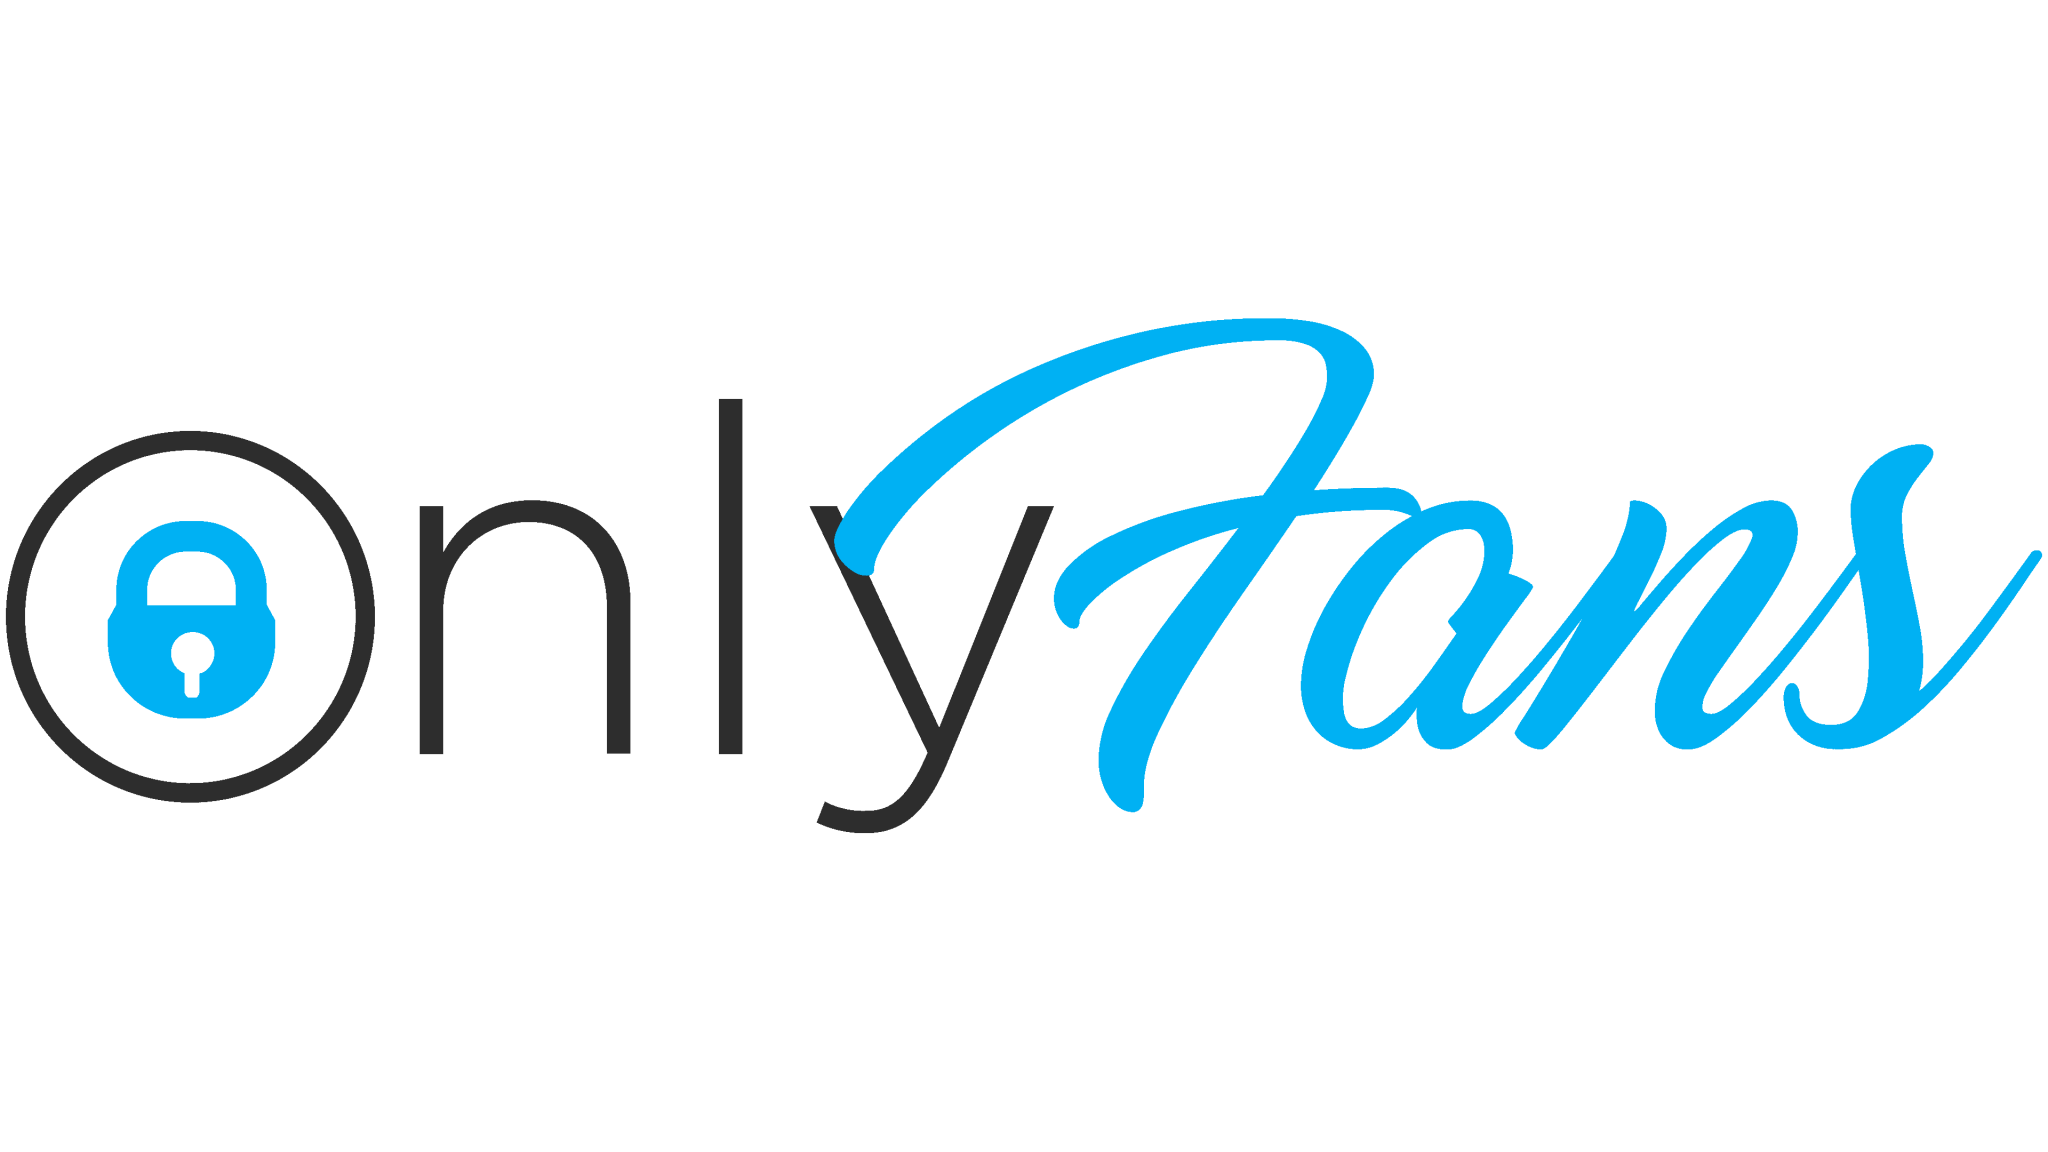 onlyfans-logo-and-symbol-meaning-history-sign-daftsex-hd